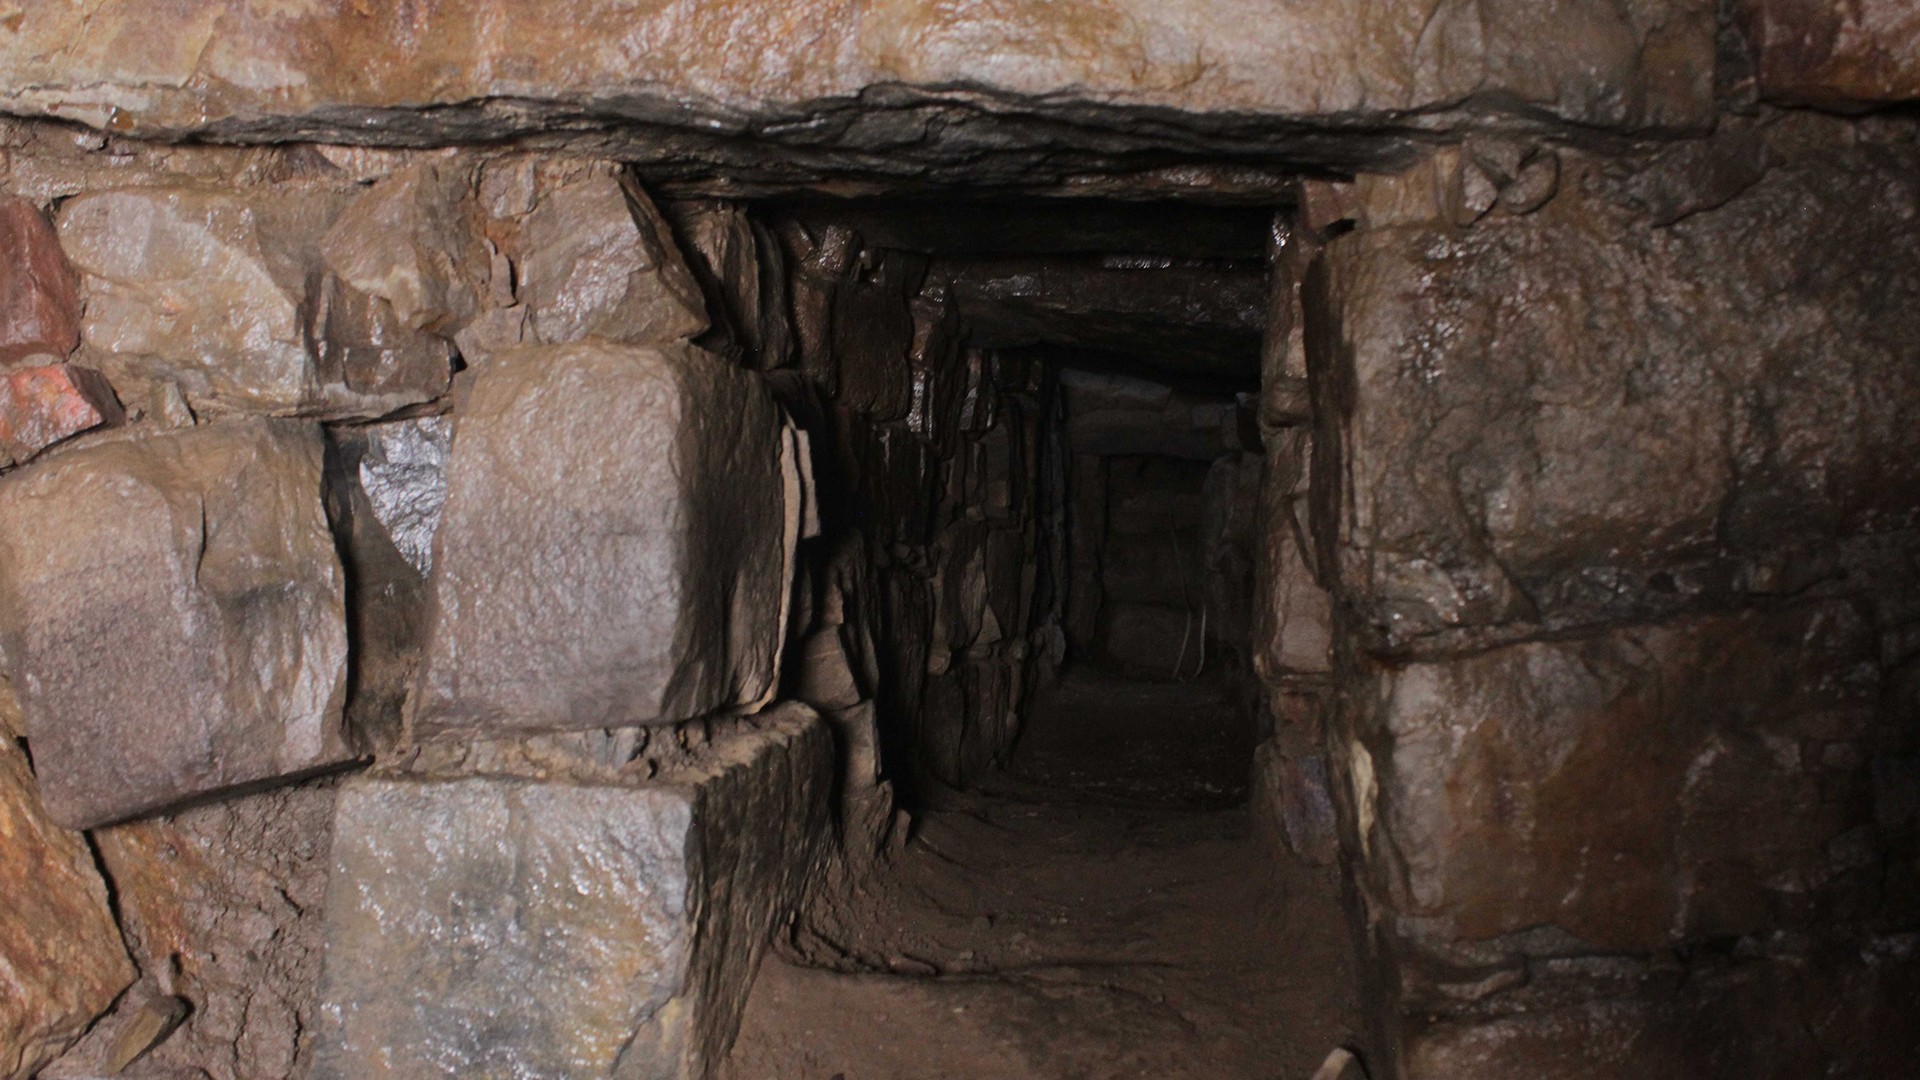 This image shows one of the sealed passages in the temple complex of Chavín de Huántar, Peru.